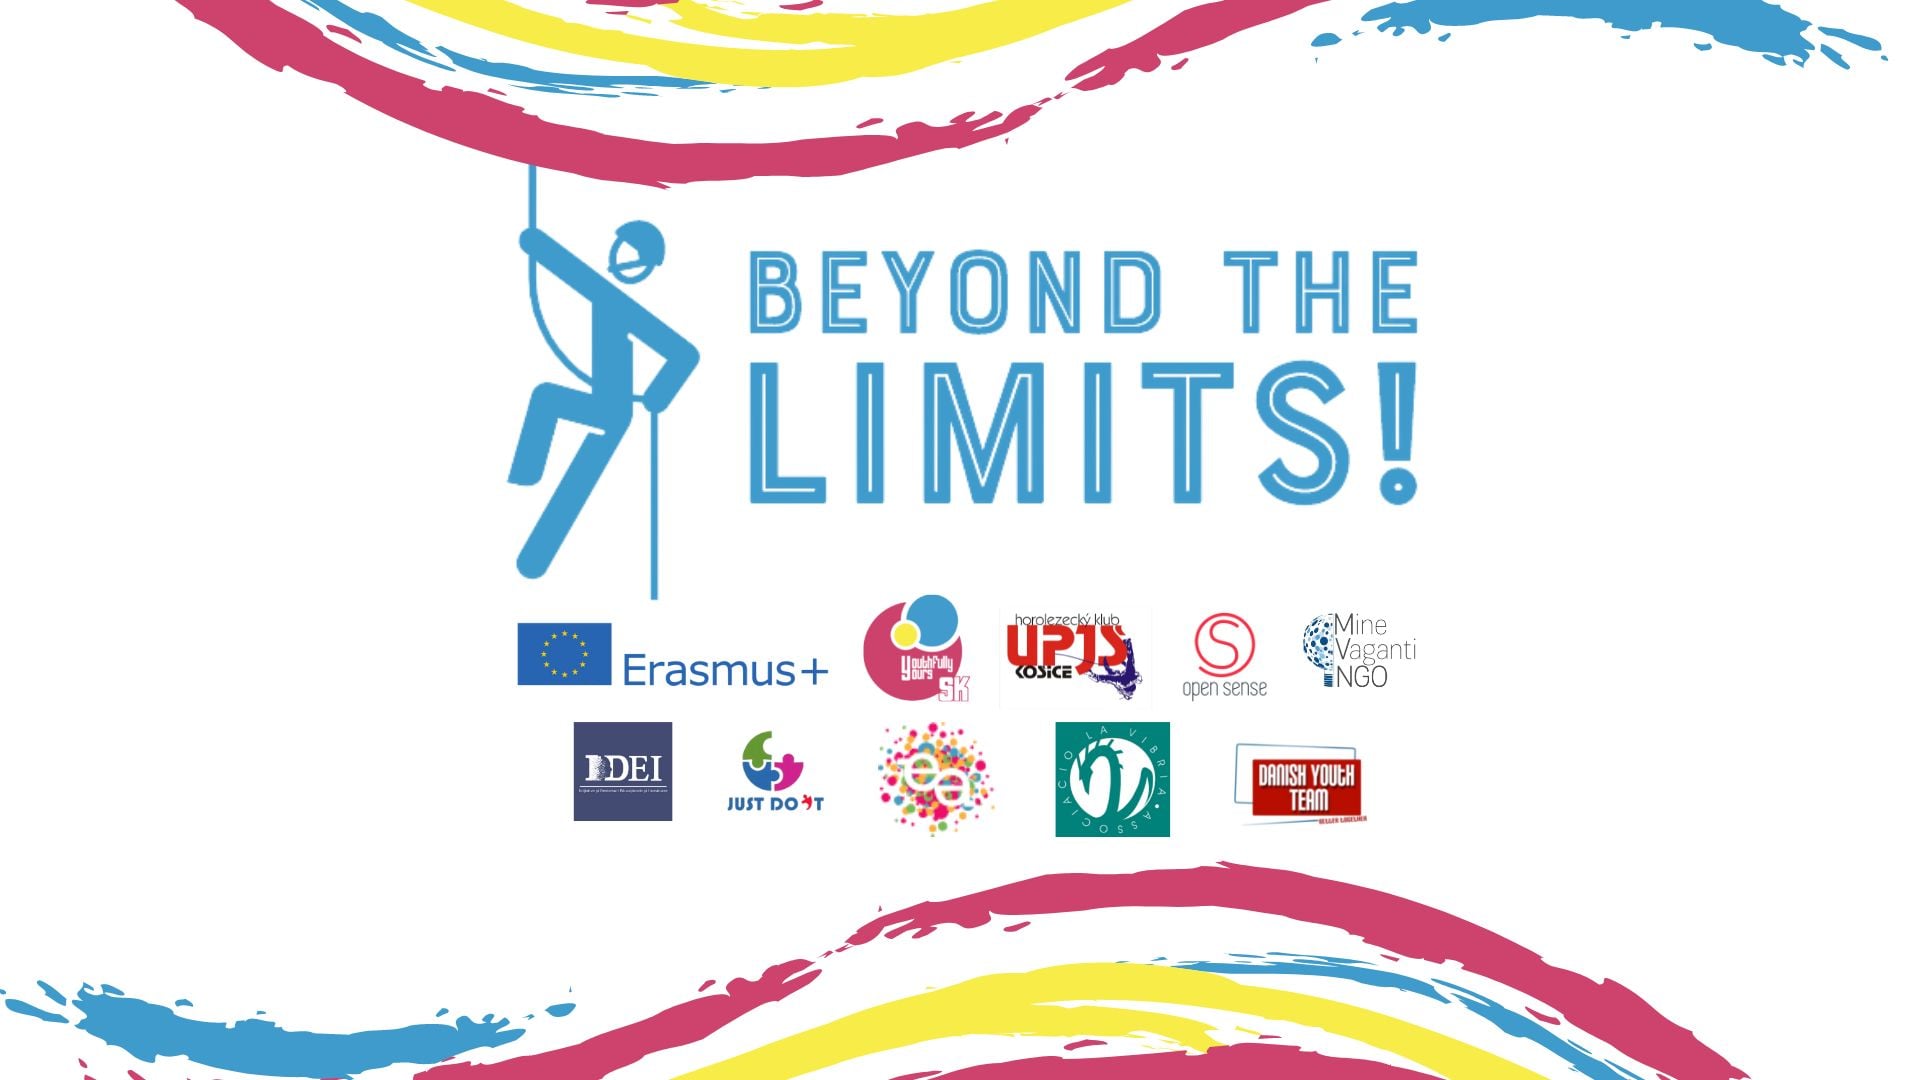 Beyond the limits